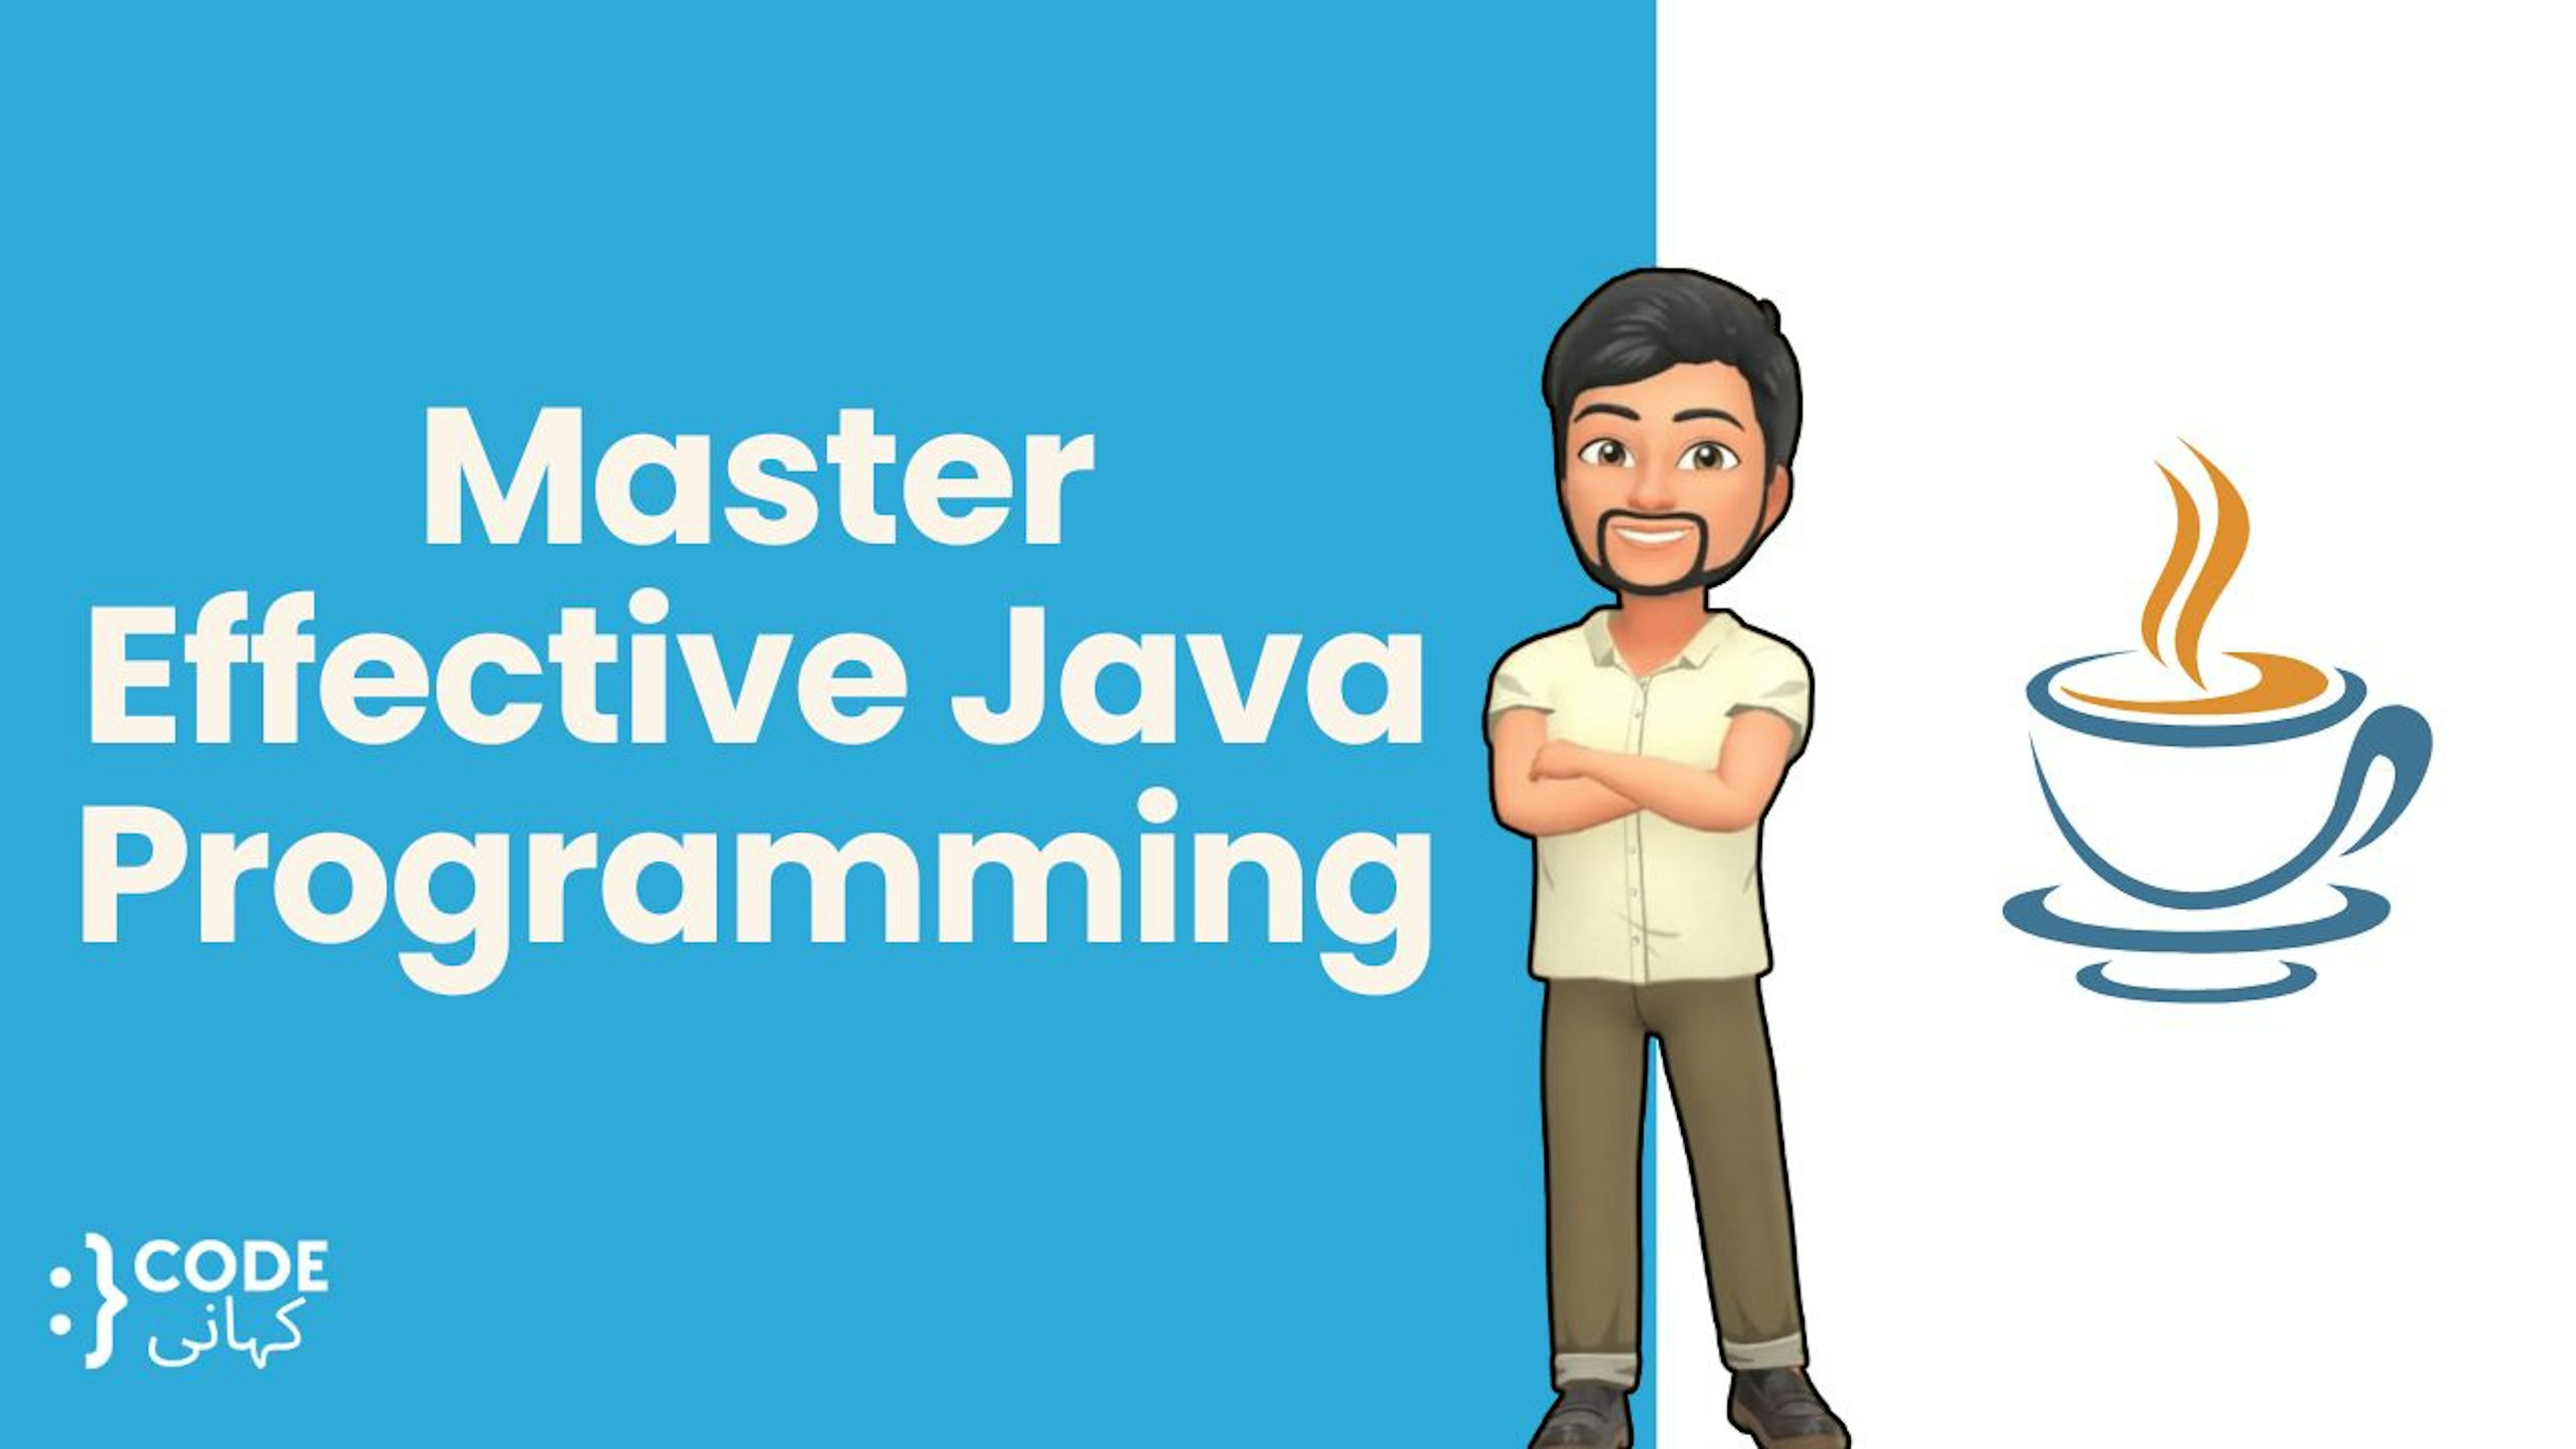 Effective Java Programming Techniques Every Developer Should Know